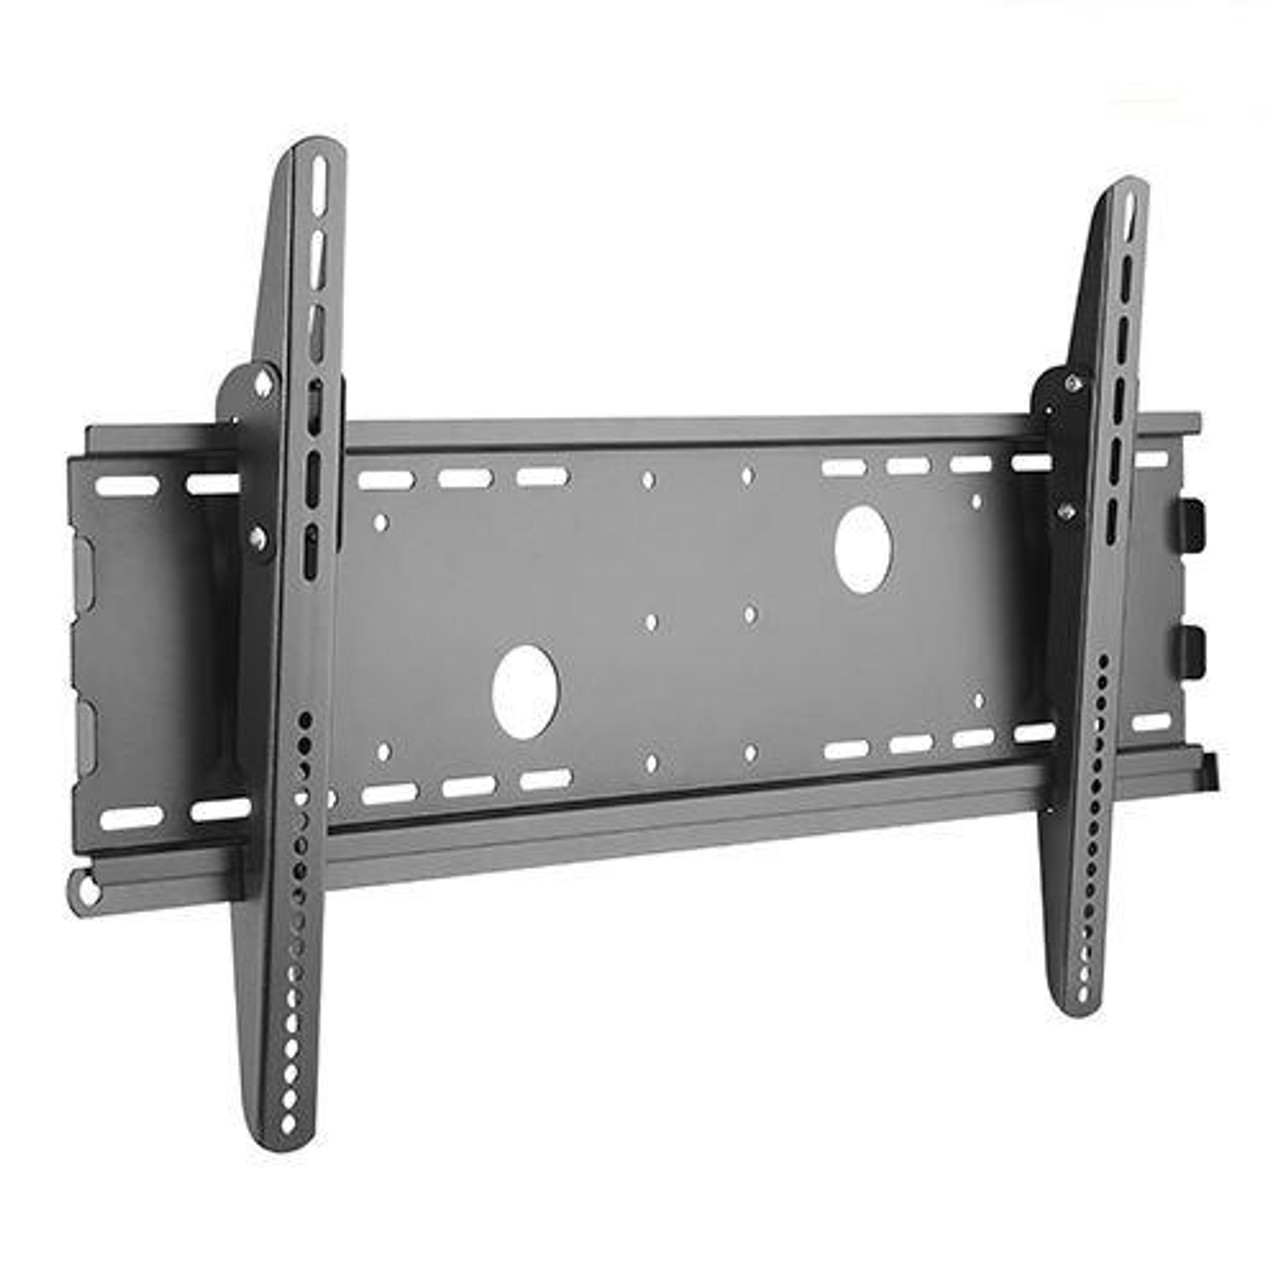 Ultra ® Heavy Duty TV Bracket 10 to 37” Low Profile 26mm Fit for Flat Screen Tv Monitor Bracket TV Mount Premium Quality Mount Made from SPCC Steel including a Spirit Level Max Load 40kgs/88lbs VESA 50x50mm upto 200x200mm Specification 